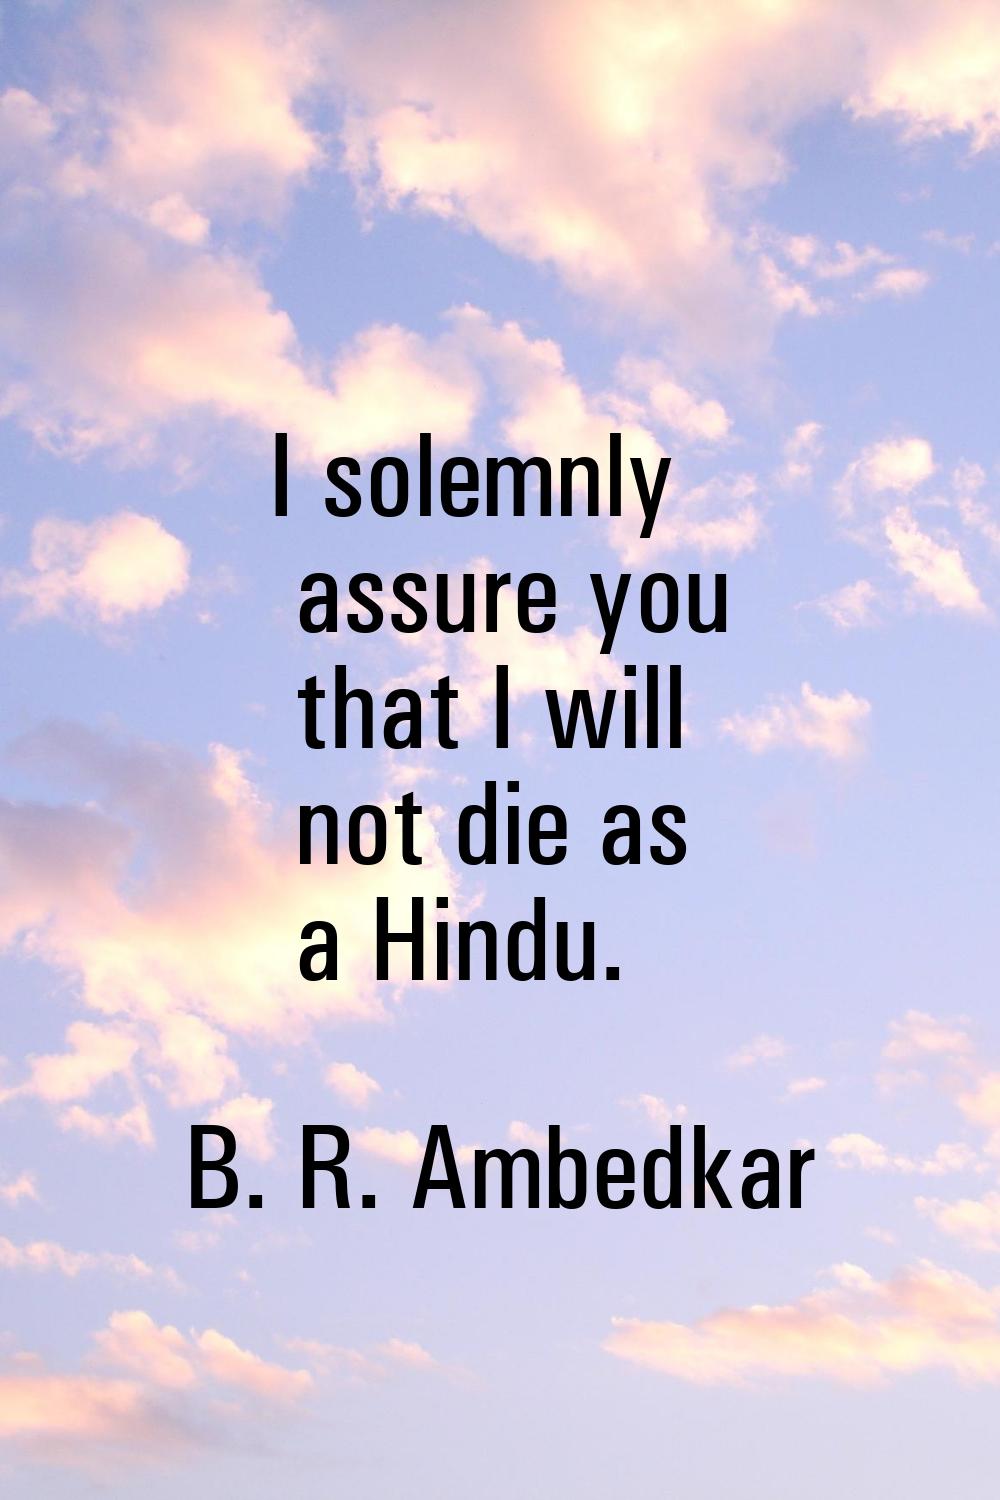 I solemnly assure you that I will not die as a Hindu.